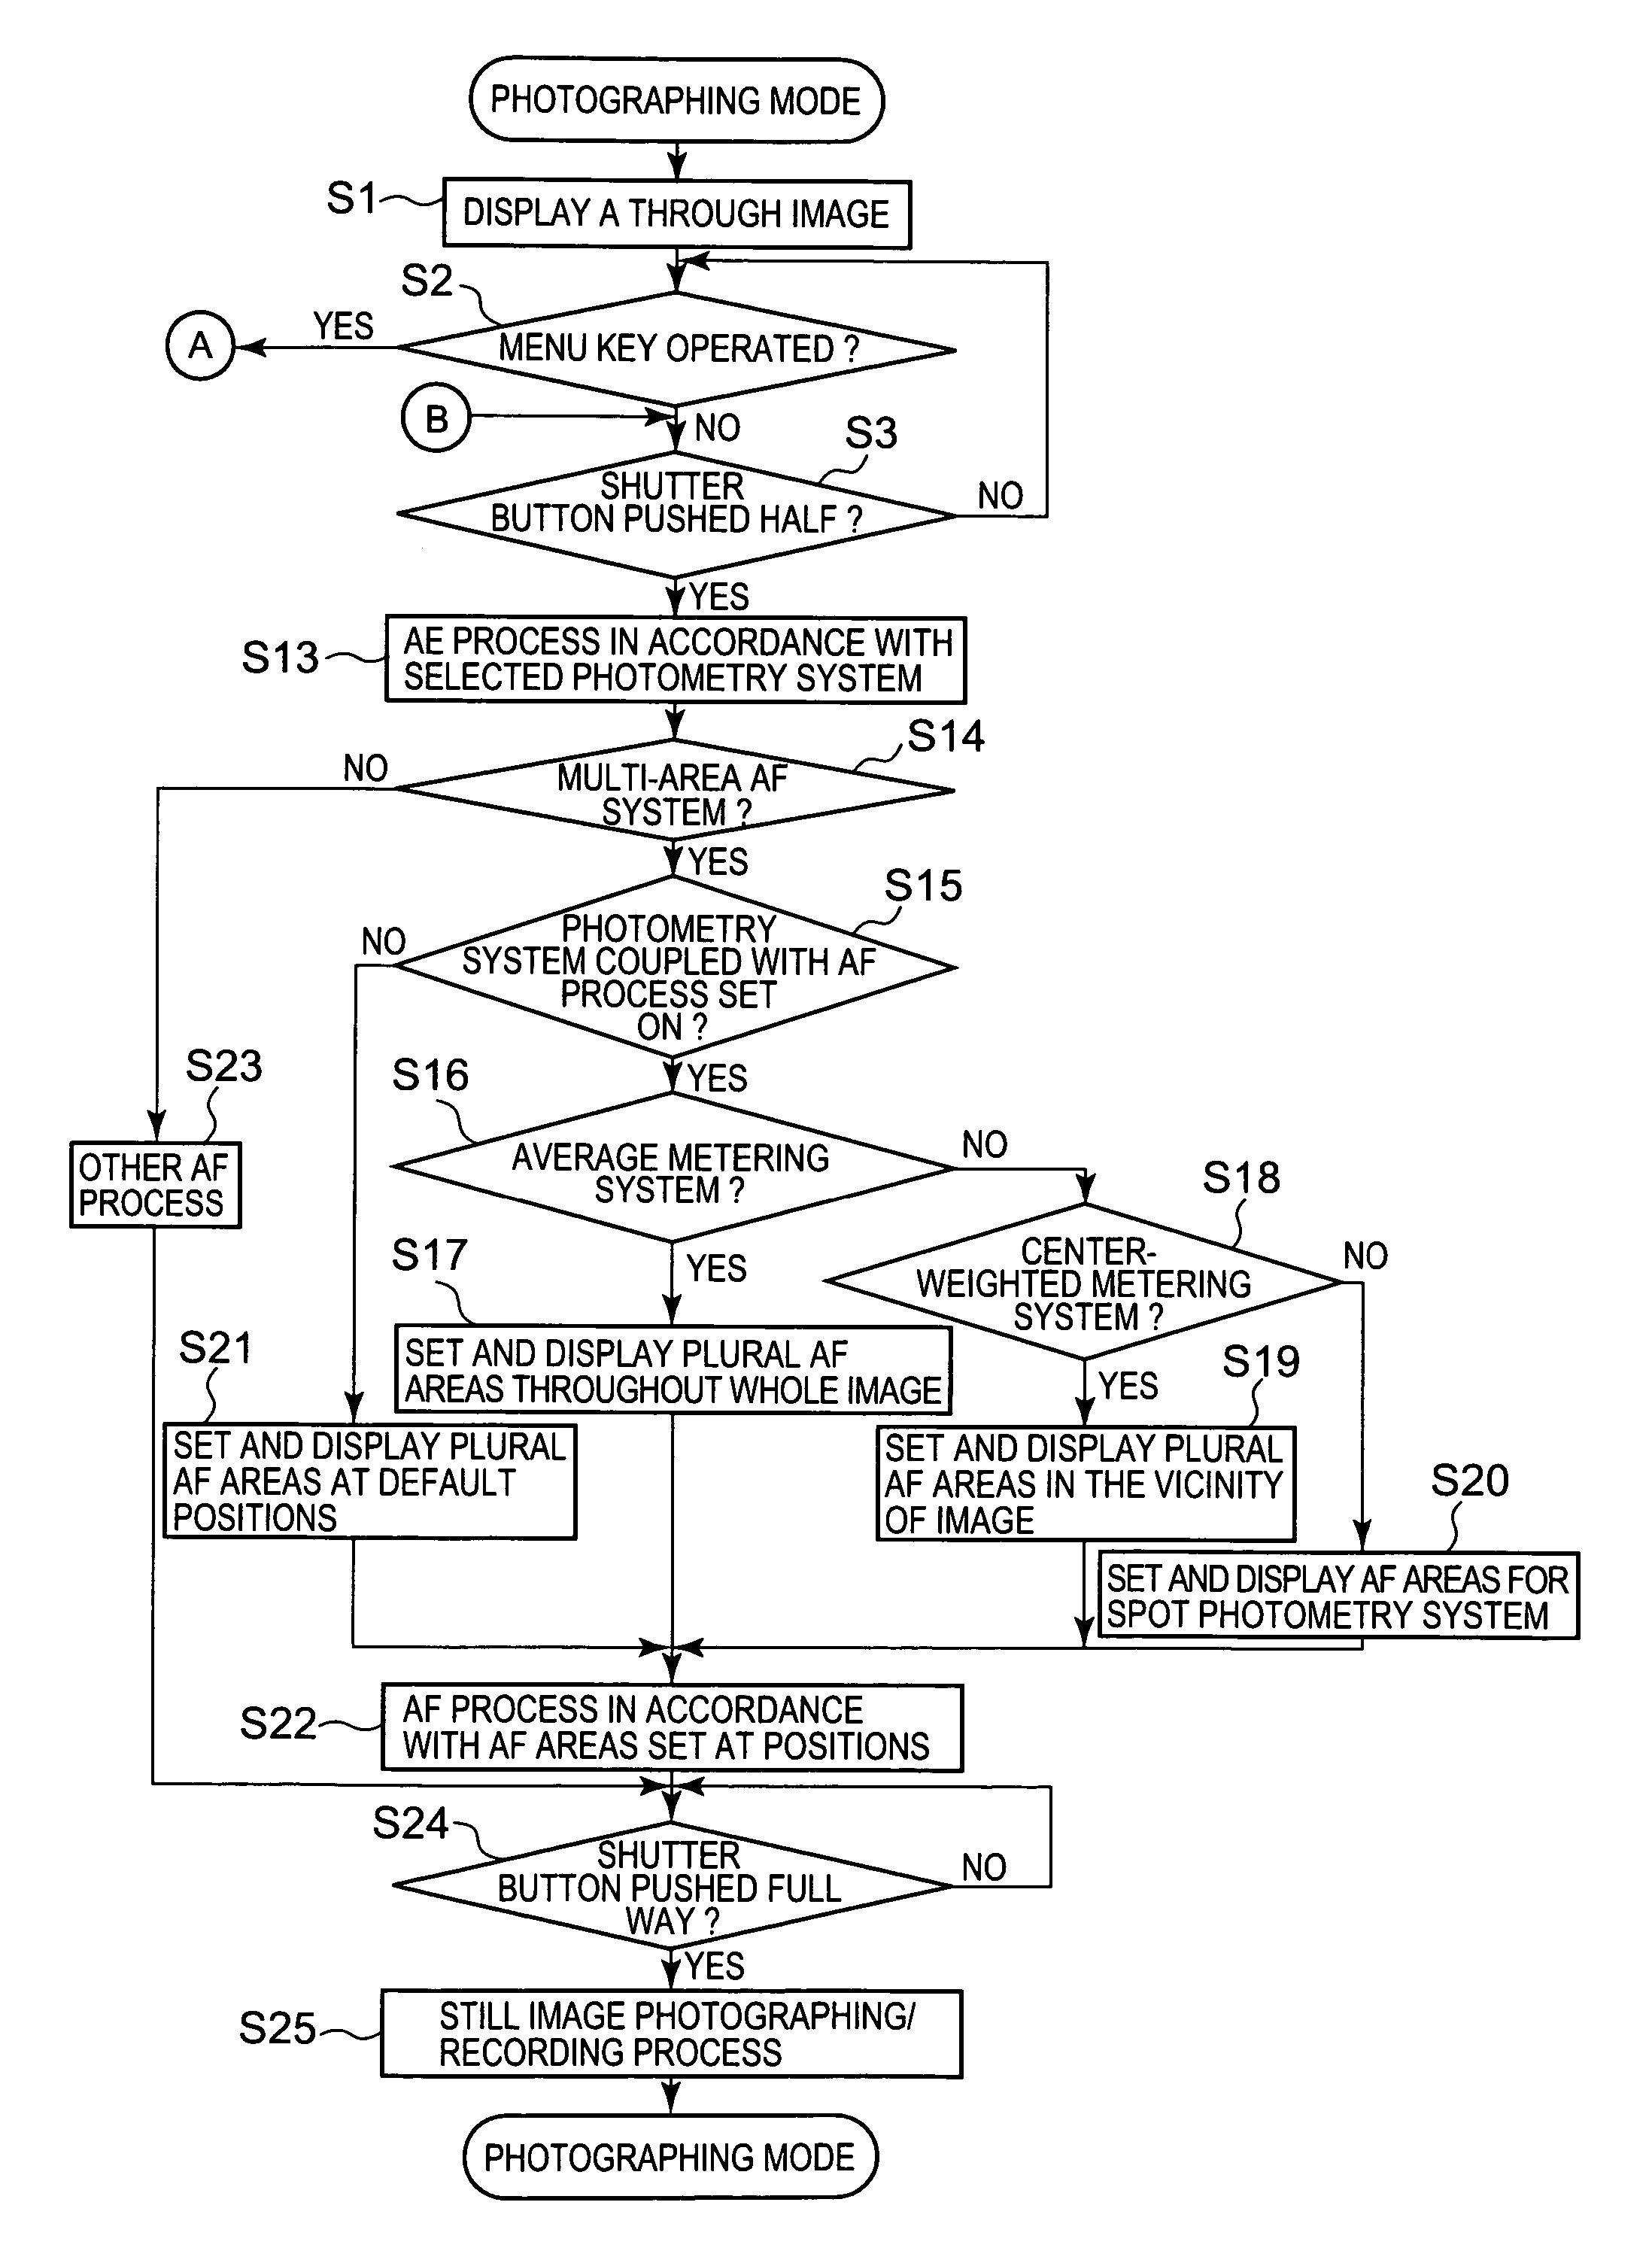 Image pick-up apparatus with a multi-area AF function